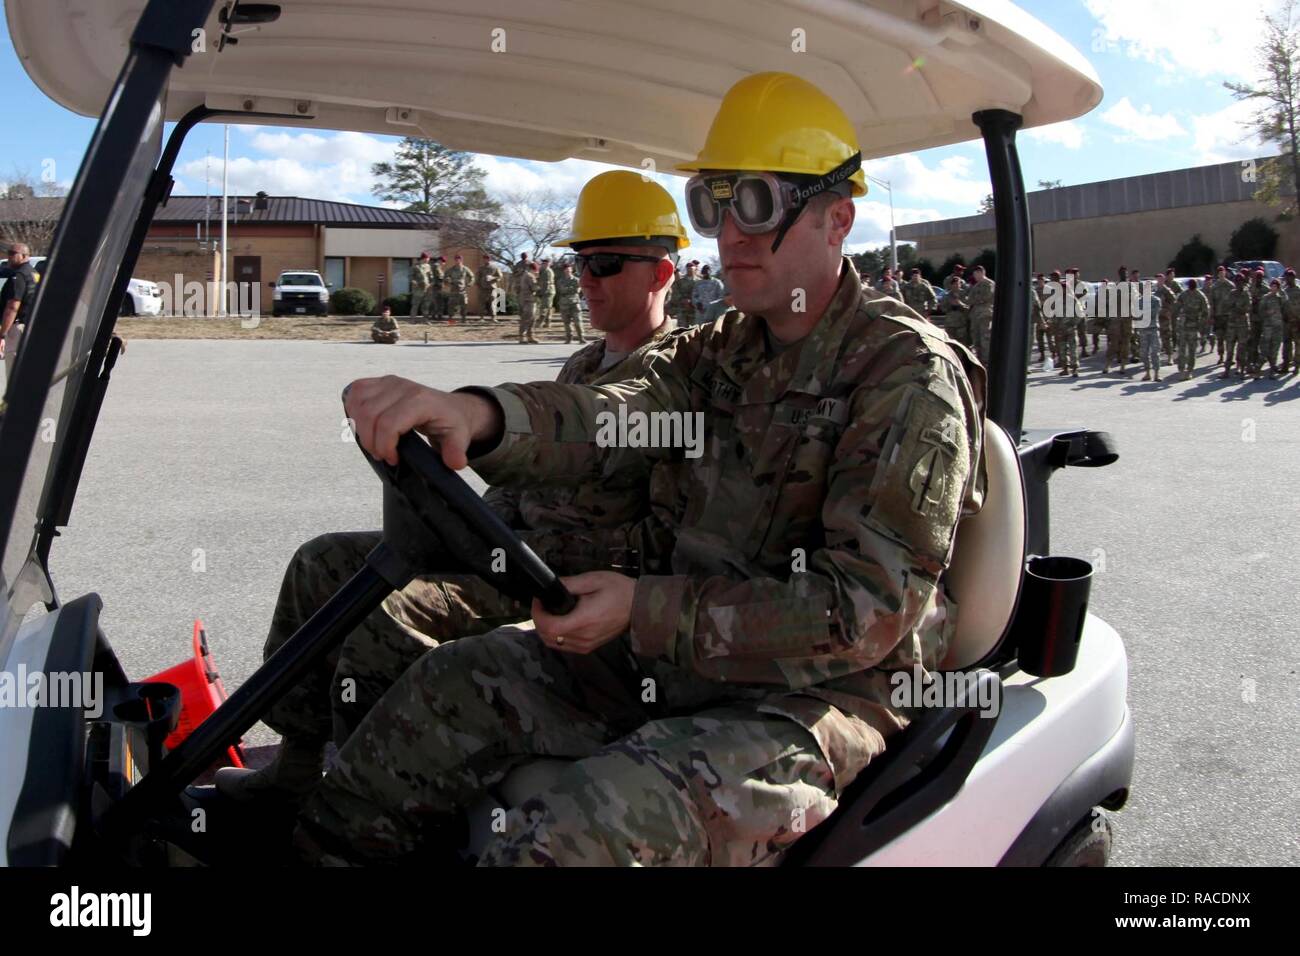 Lt. Col. Patrick McCarthy, Commander of 7th Military Information Support Battalion, 4th Military Information Support Group, attempted to navigate a simple cone driving course while wearing vision distorting “drunk goggles” meant to simulate a blood alcohol content between .08 and .15, Jan. 12, 2017. The Fort Bragg Provost Marshall Office Traffic Division assisted 7th Military Information Support Battalion, to conduct an alcohol awareness safety class to raise awareness of alcohol’s rapid effects and to deter drunken driving. Stock Photo